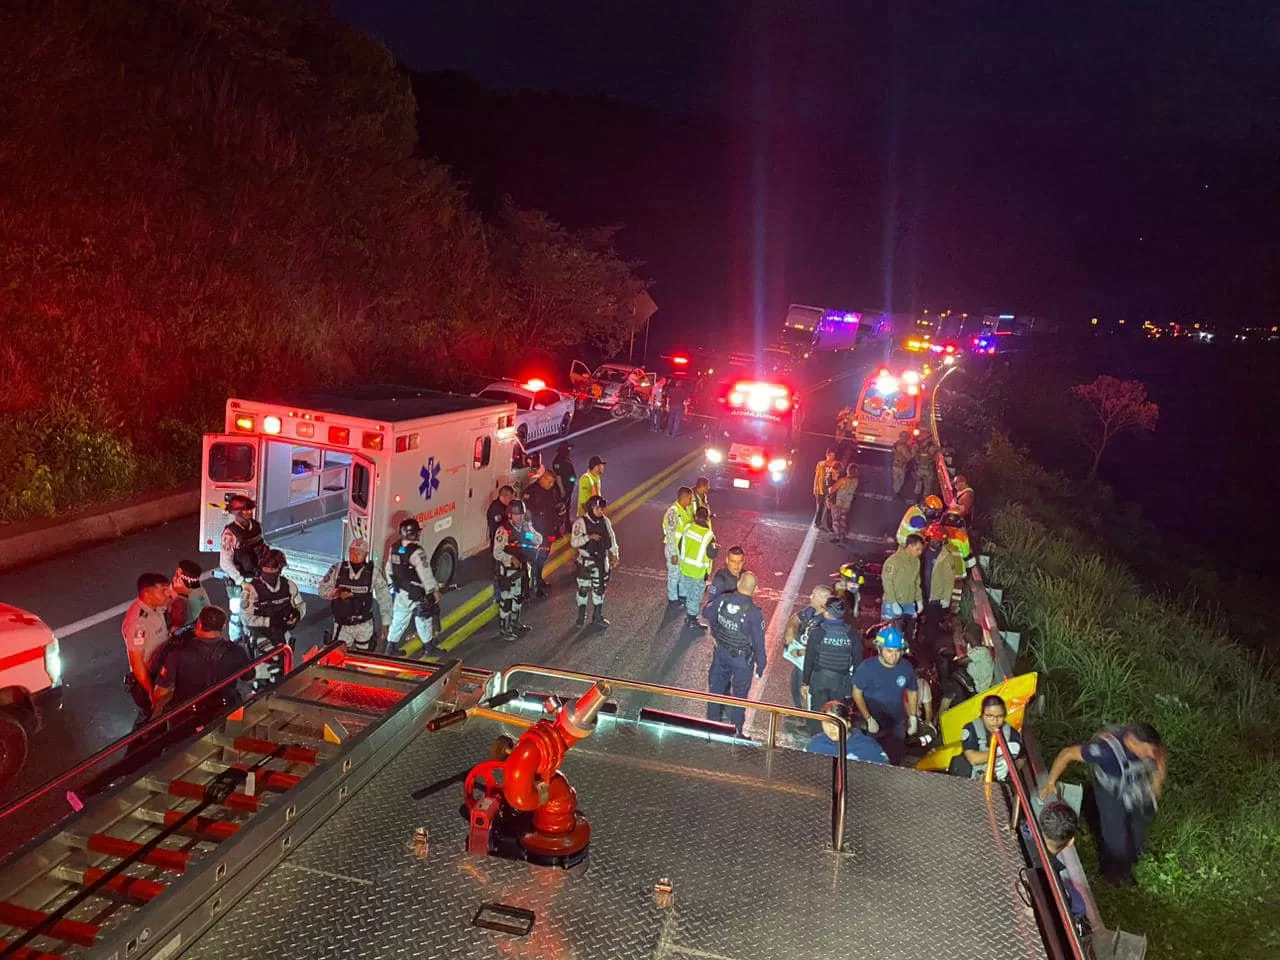  Bus accident leaves 18 dead in the Mexican state of Nayarit;  including Dominicans
